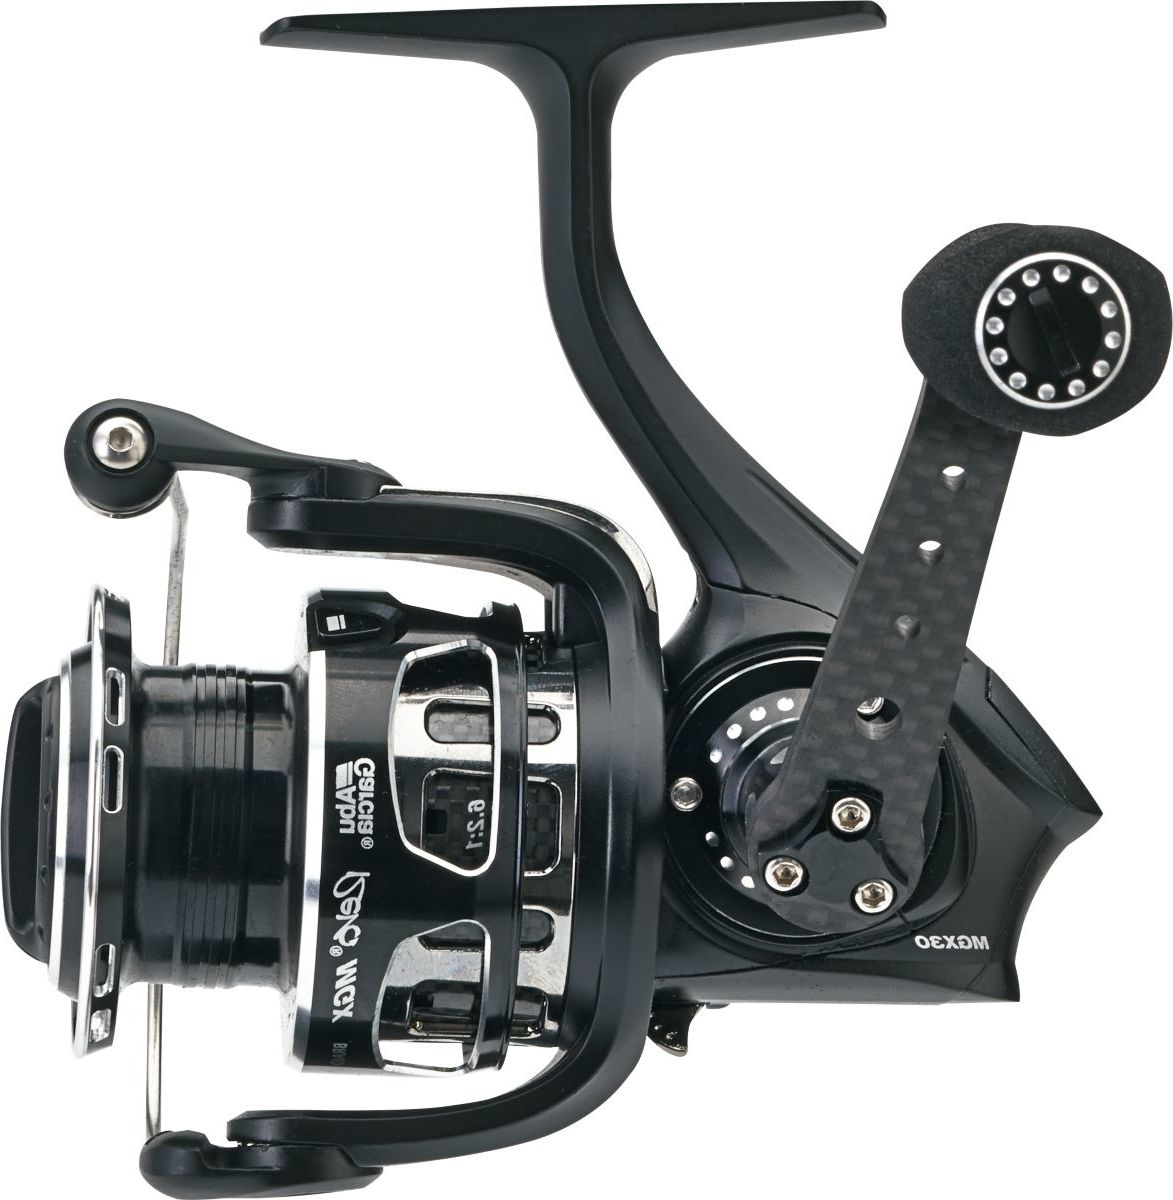 Spinning Surf Reel Fixed Spool Reel Double Drag System 11+1 Ball Bearings 5.1:1 